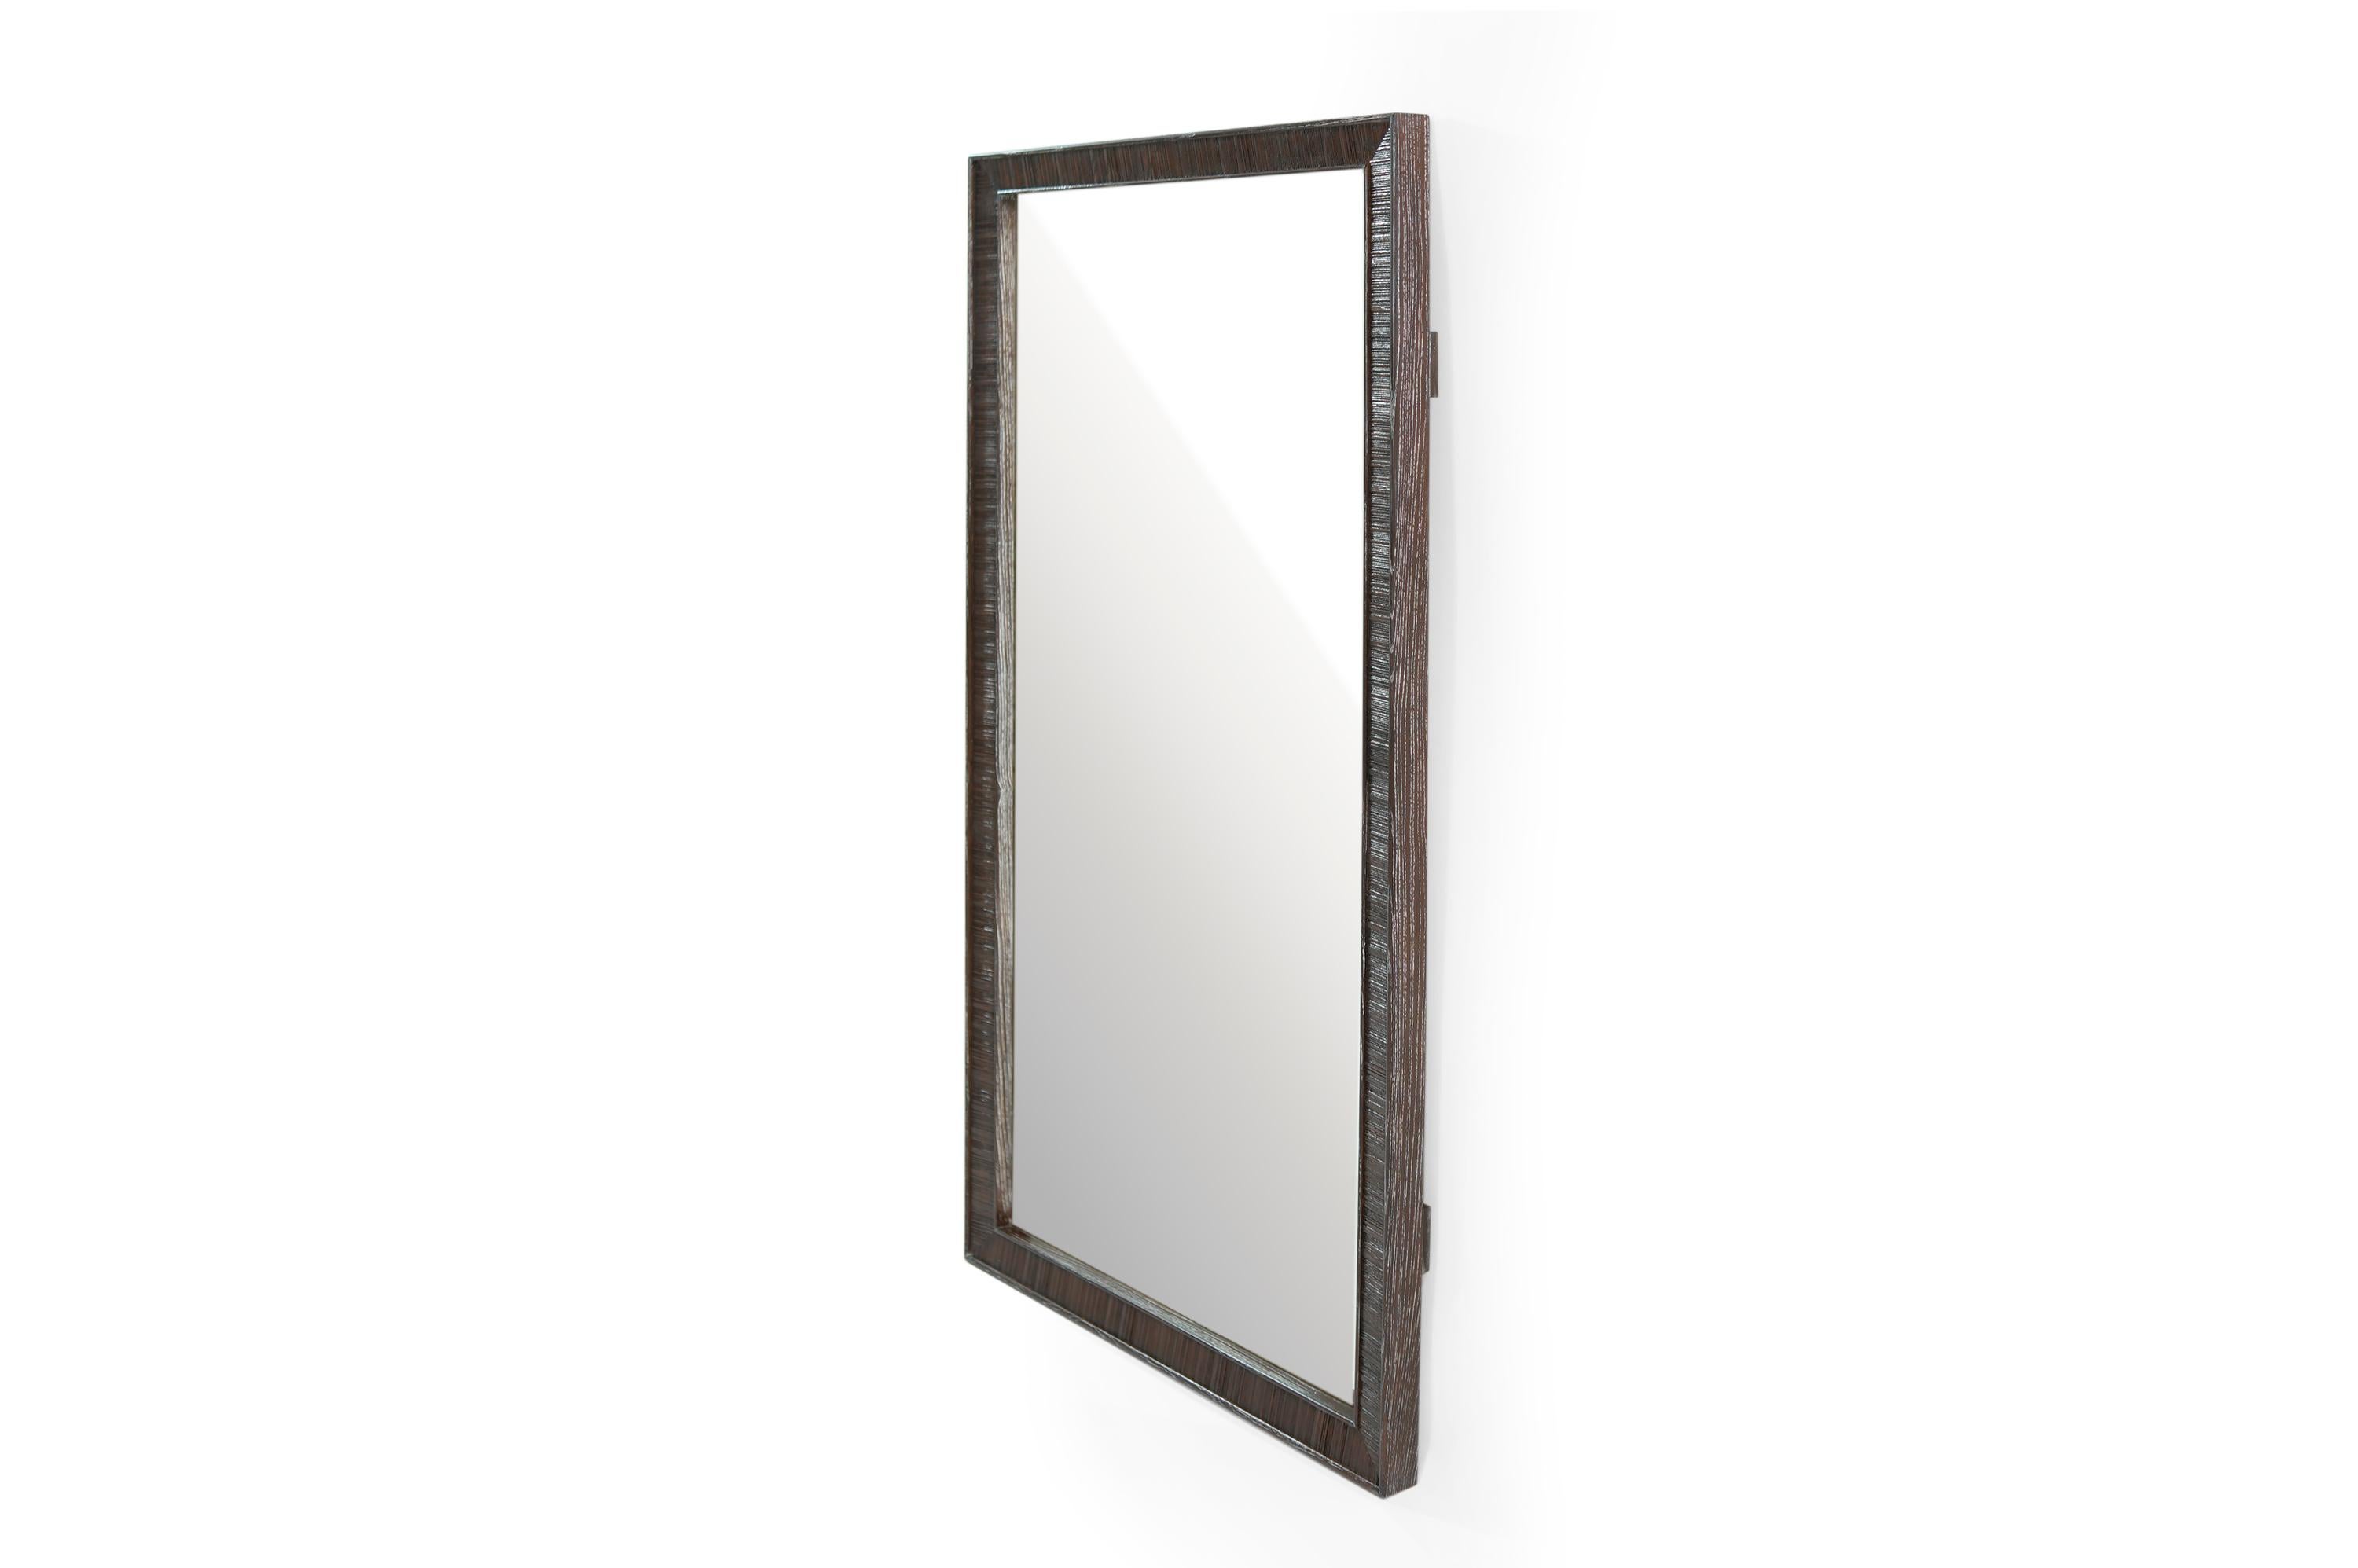 Soild oak frame rustic mirror done in ceruse. Designed by Paul Frankl, circa 1950s.
Could be hung vertically or horizontally. Original mirror in excellent condition. Frame fully restored.